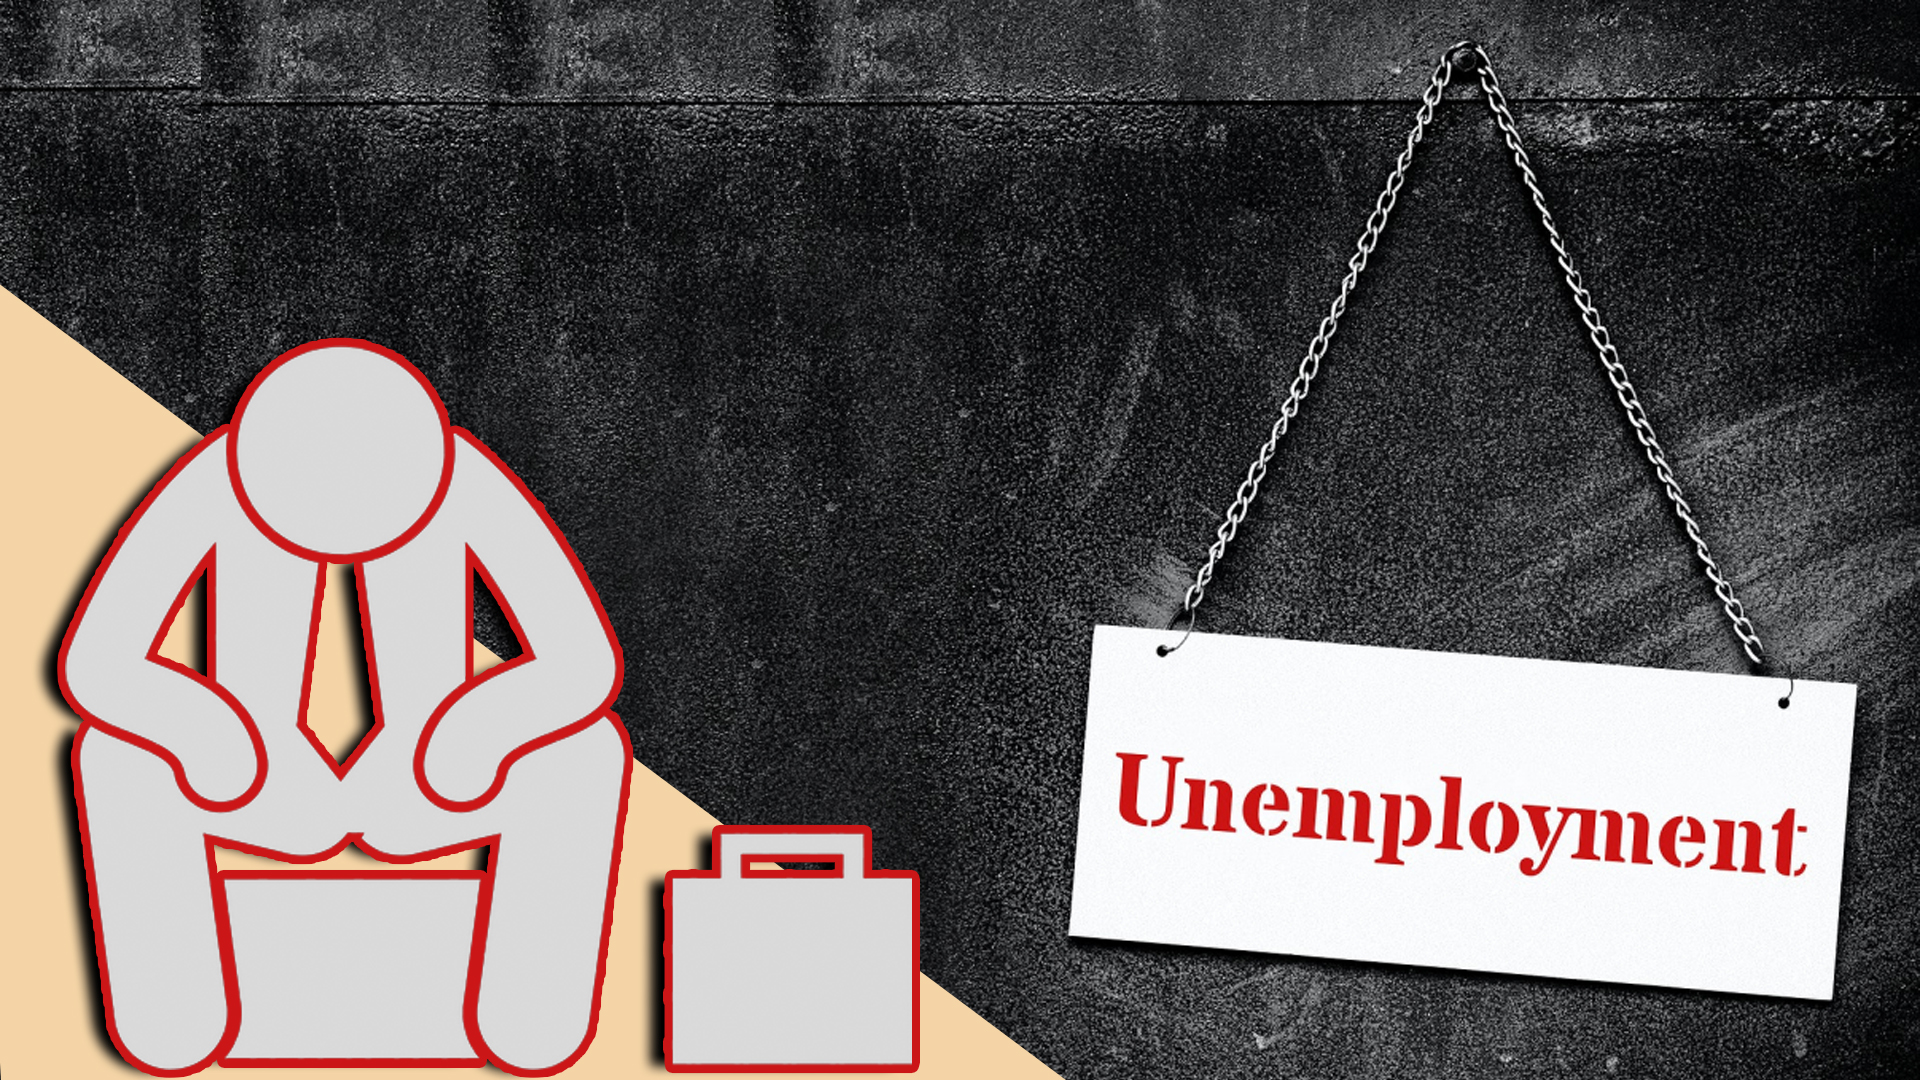 Why Inflation Bothers Capitalist Govts More than Unemployment